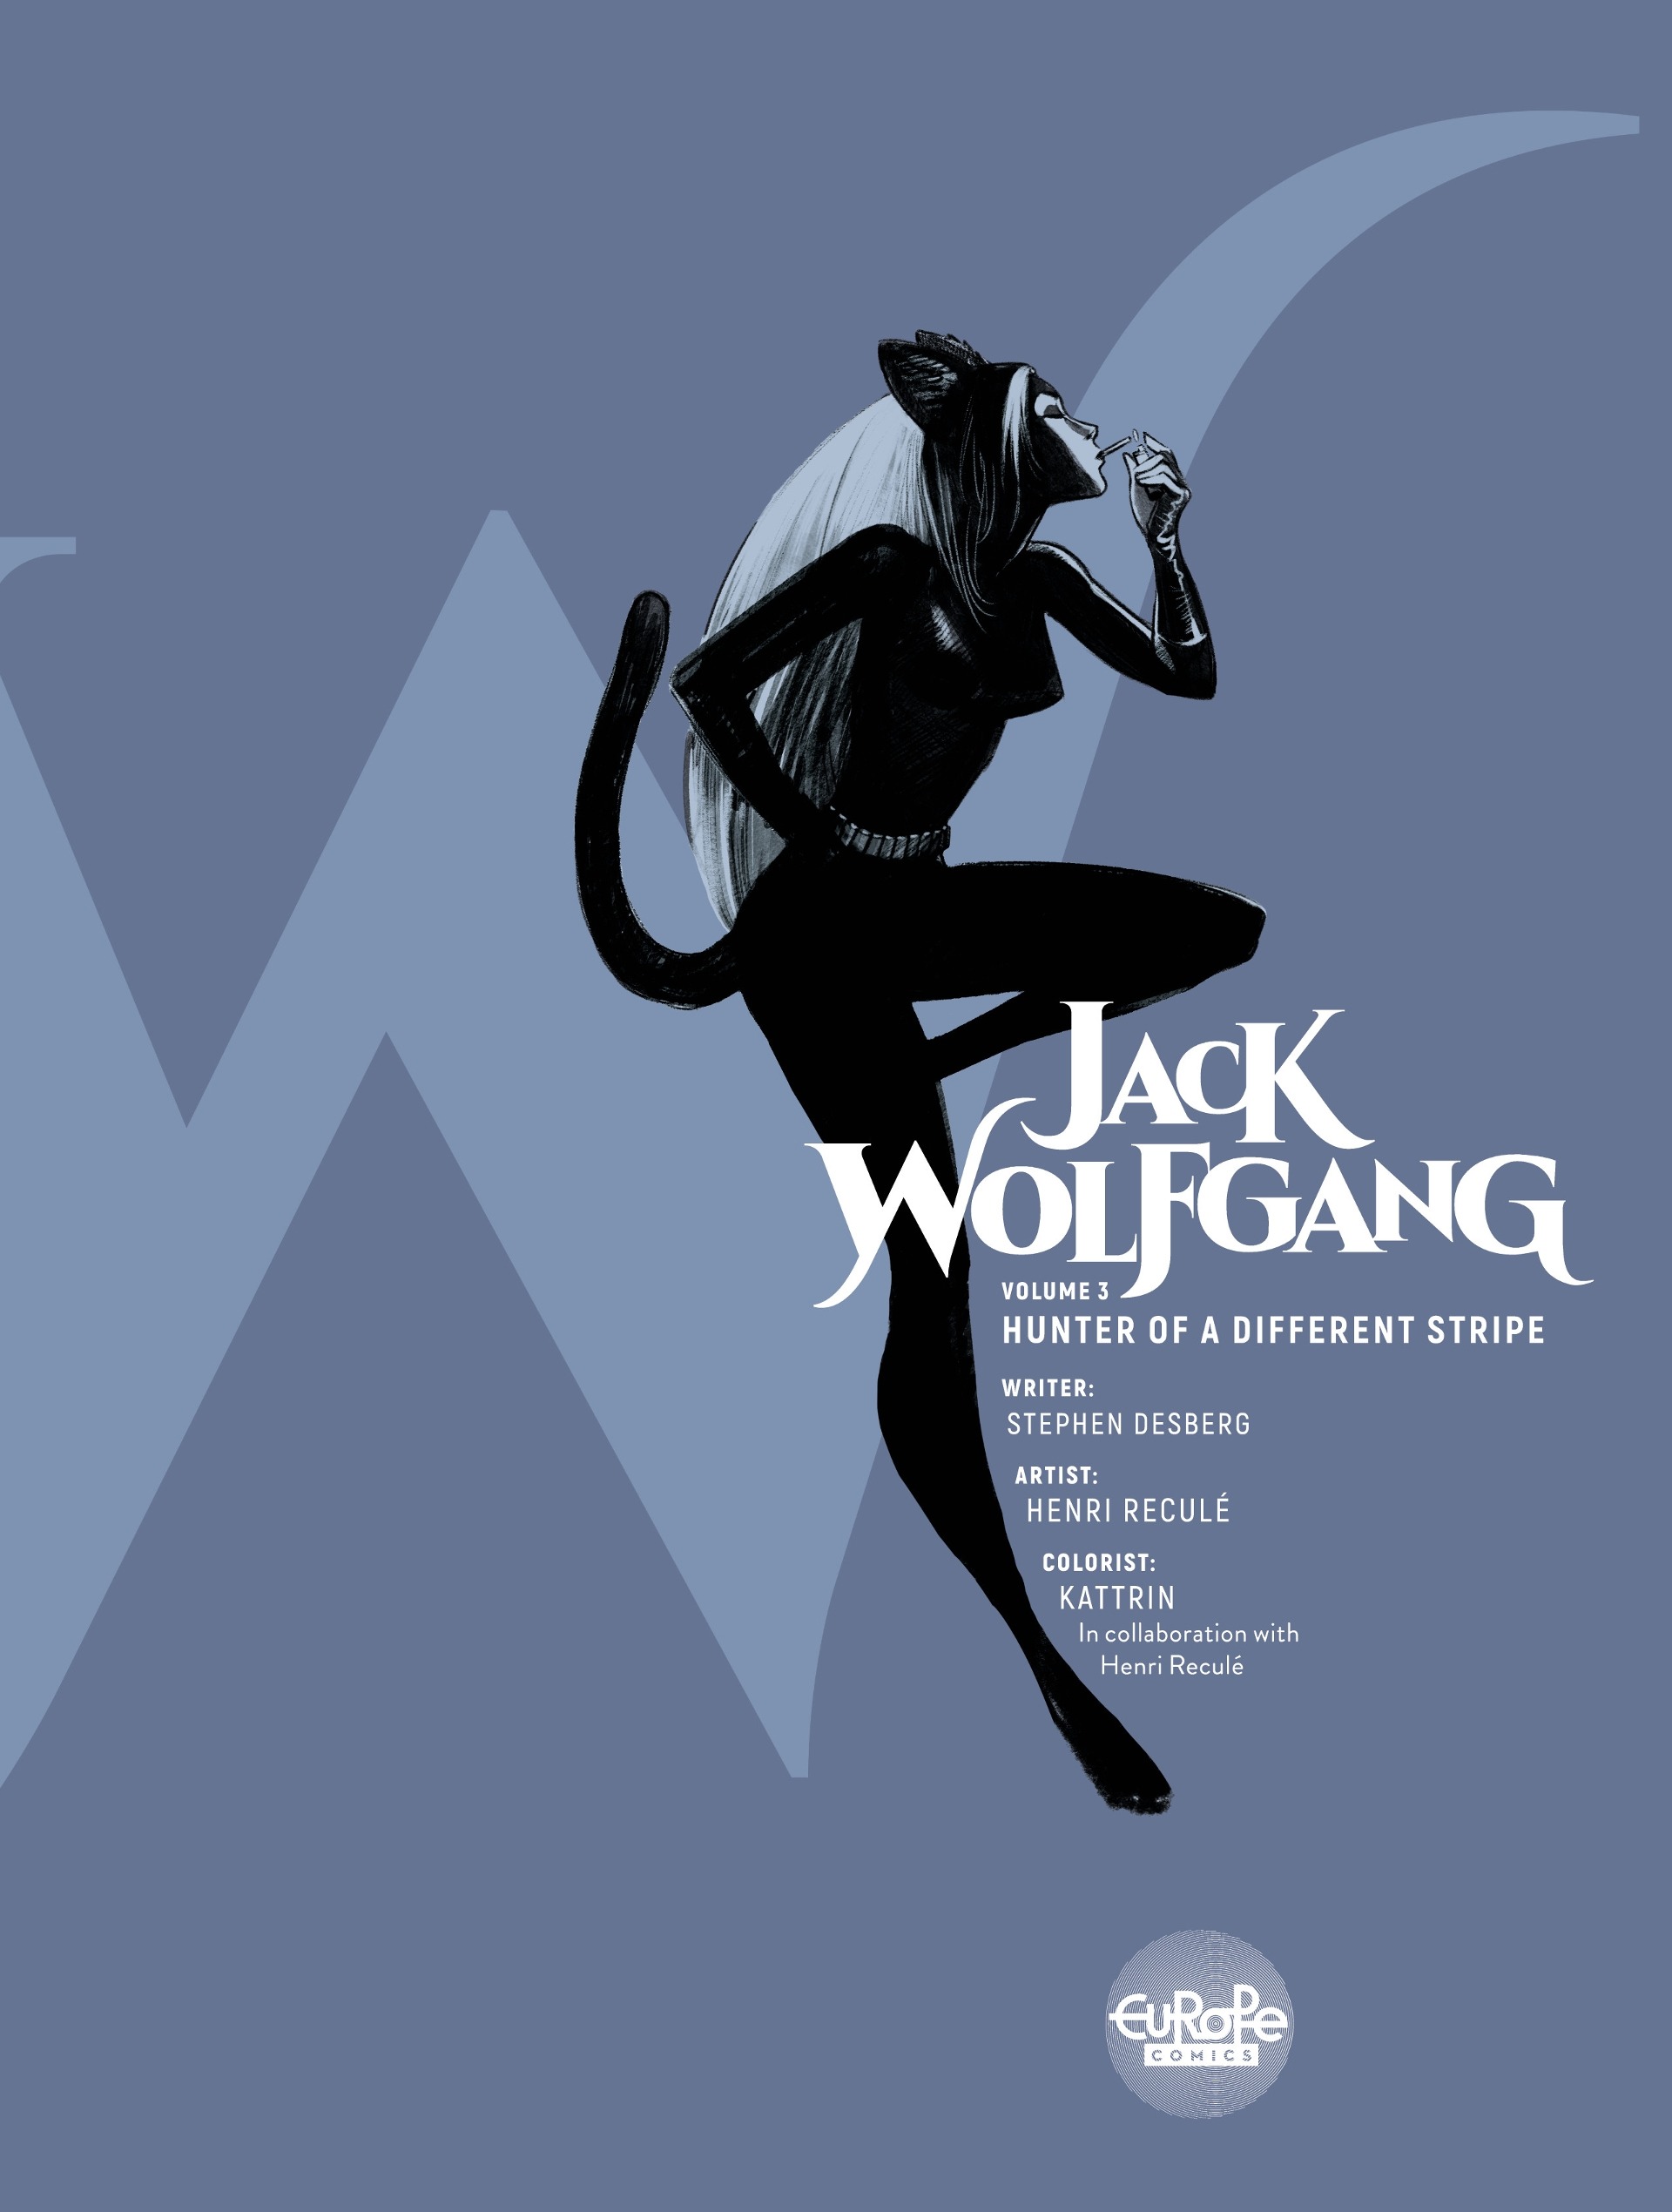 Read online Jack Wolfgang comic -  Issue #3 - 3